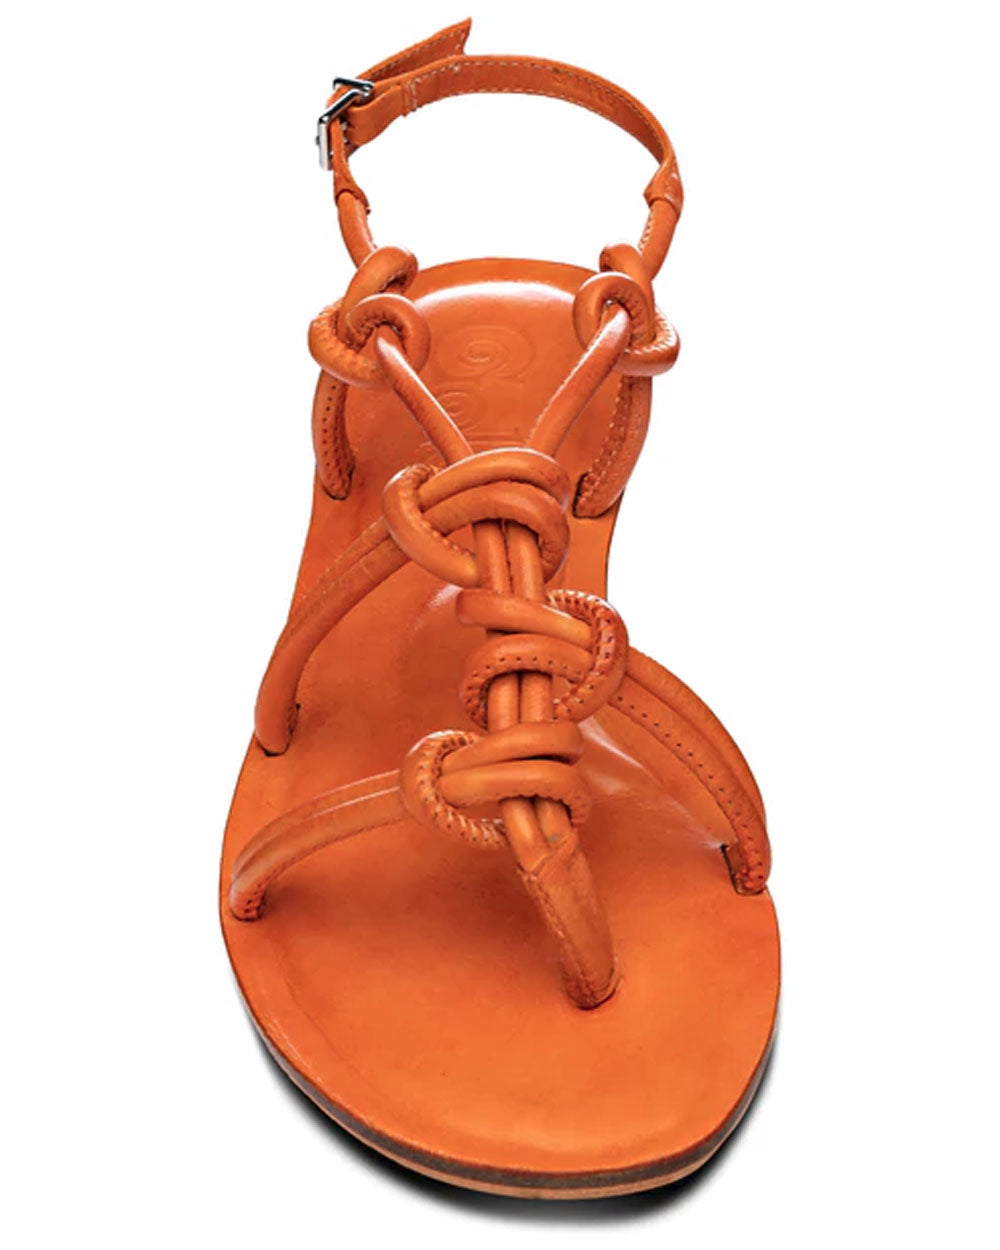 Forget Me Knot Leather Knotted Sandal in Tangerine Orange